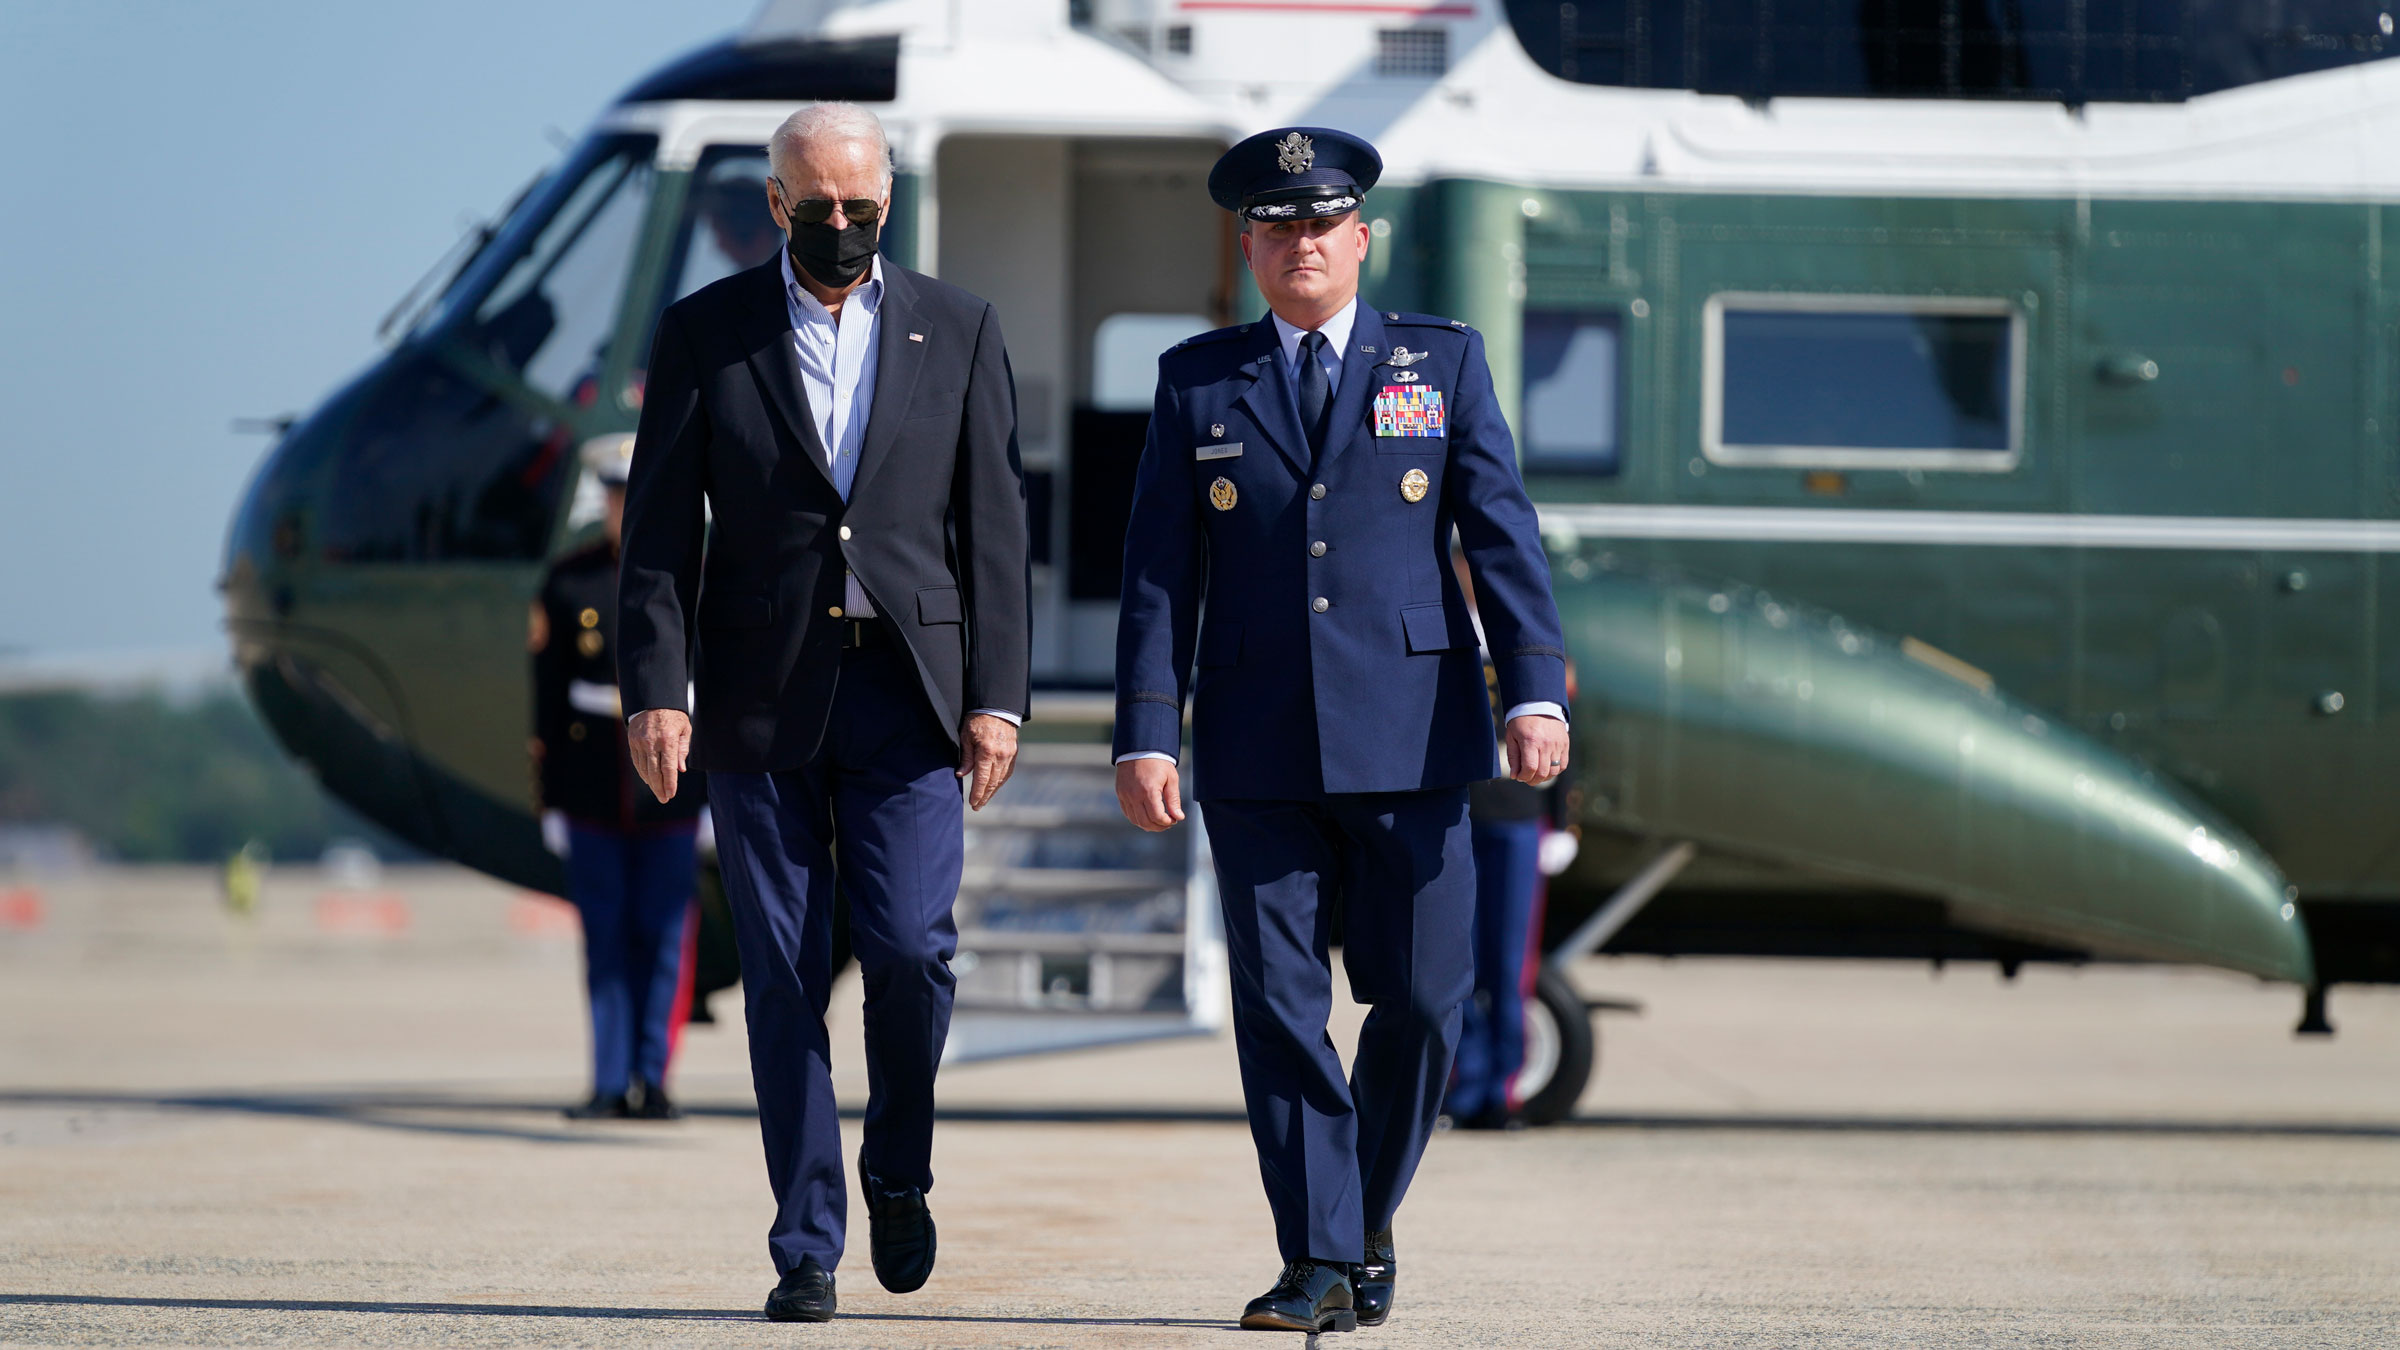 President Joe Biden is escorted Tuesday by Col. Matthew E. Jones, commander of the 89th Airlift Wing, before boarding Air Force One at Andrews Air Force Base in Maryland.